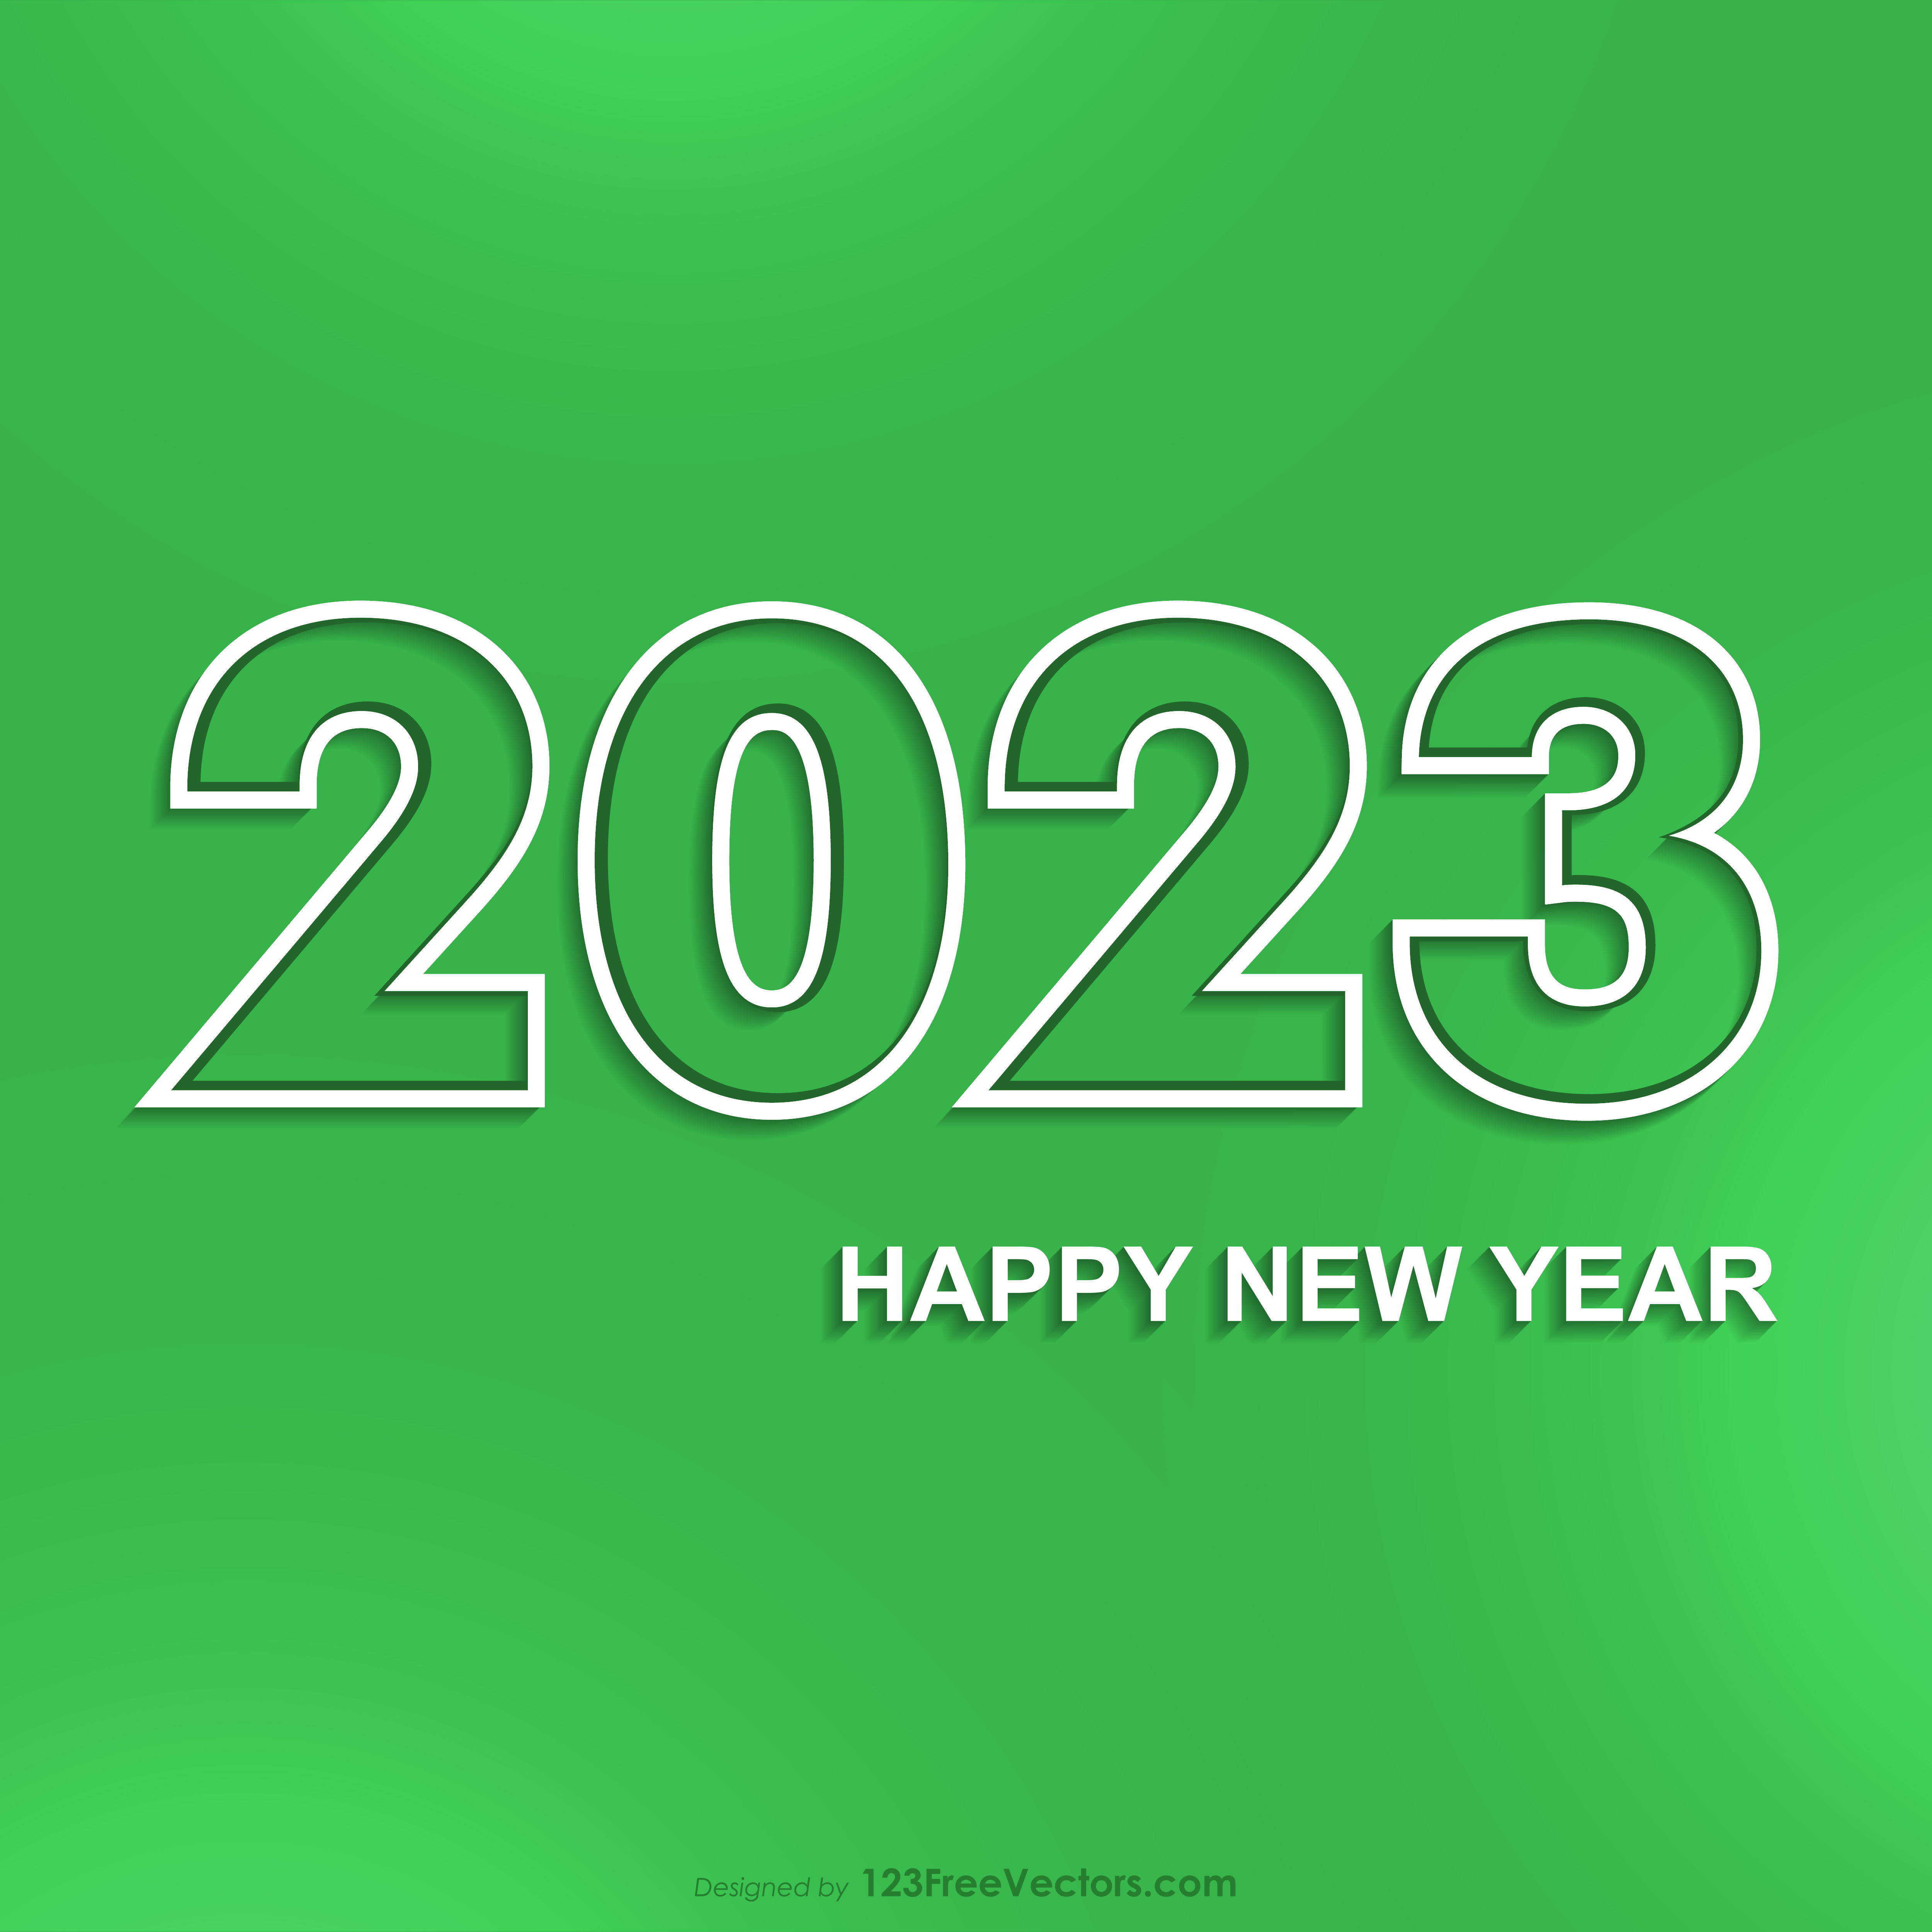 Get Ready For The New Year With Happy New Year 2023 Green Background